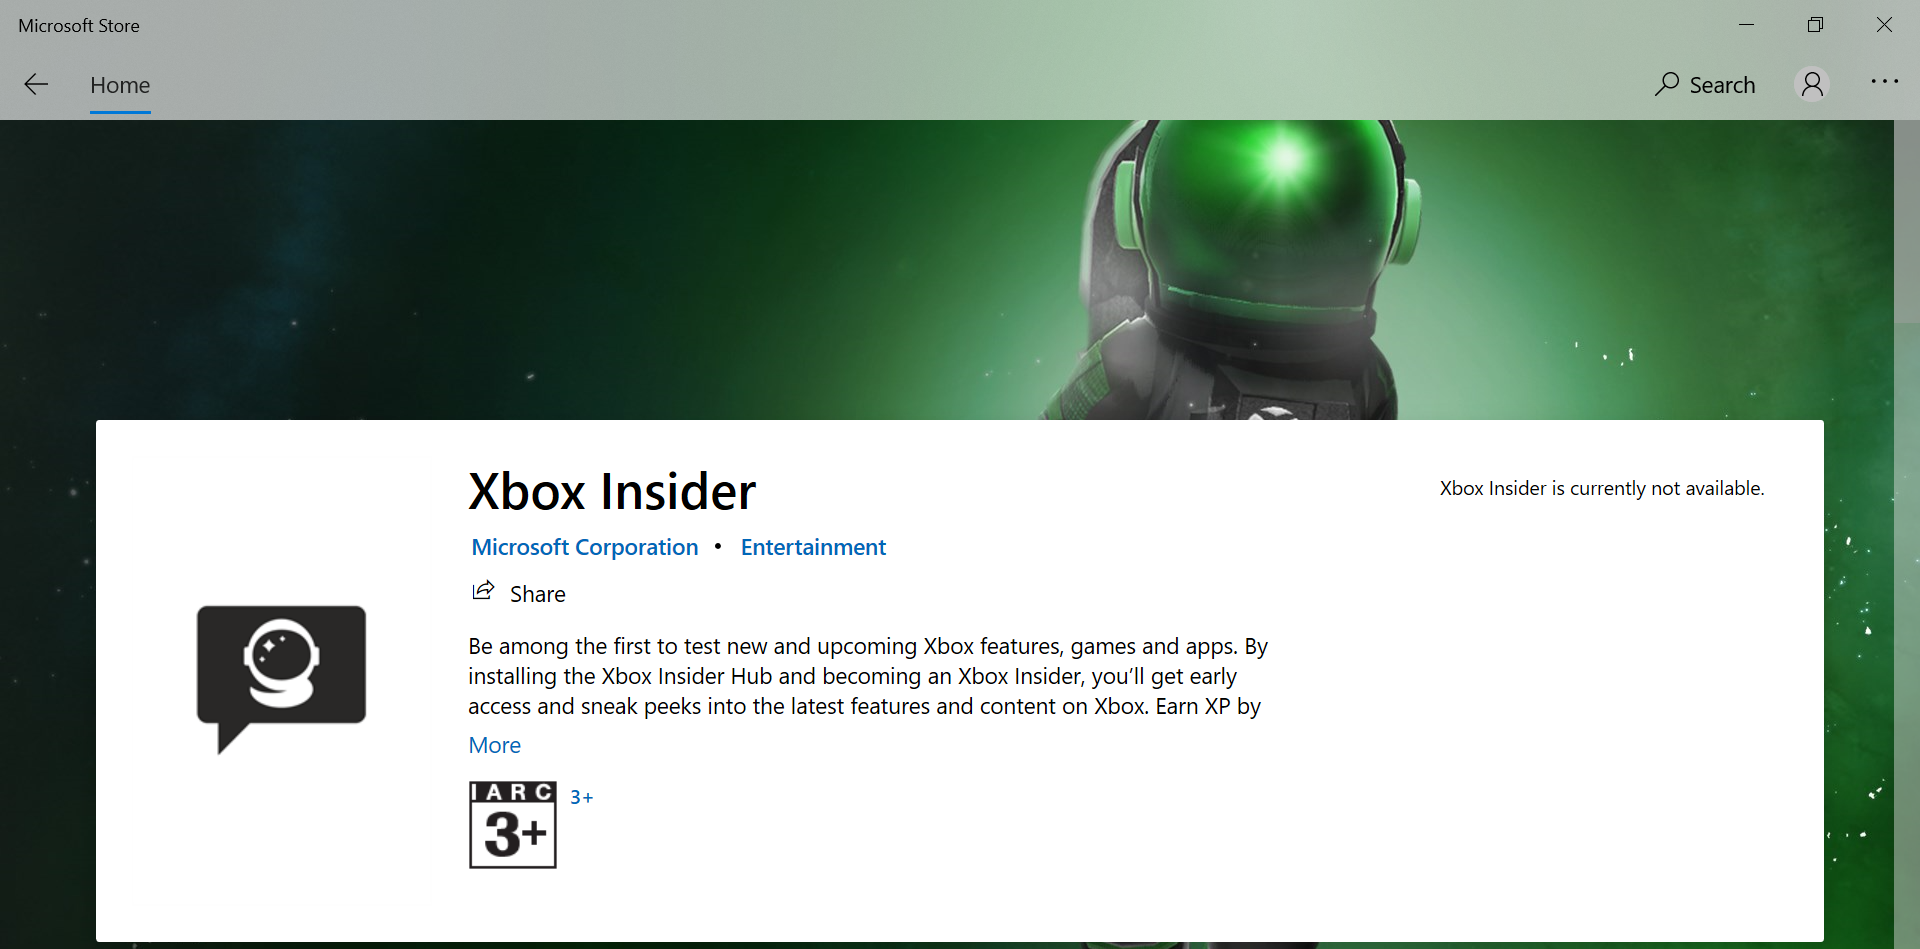 Xbox Insider is currently not Available